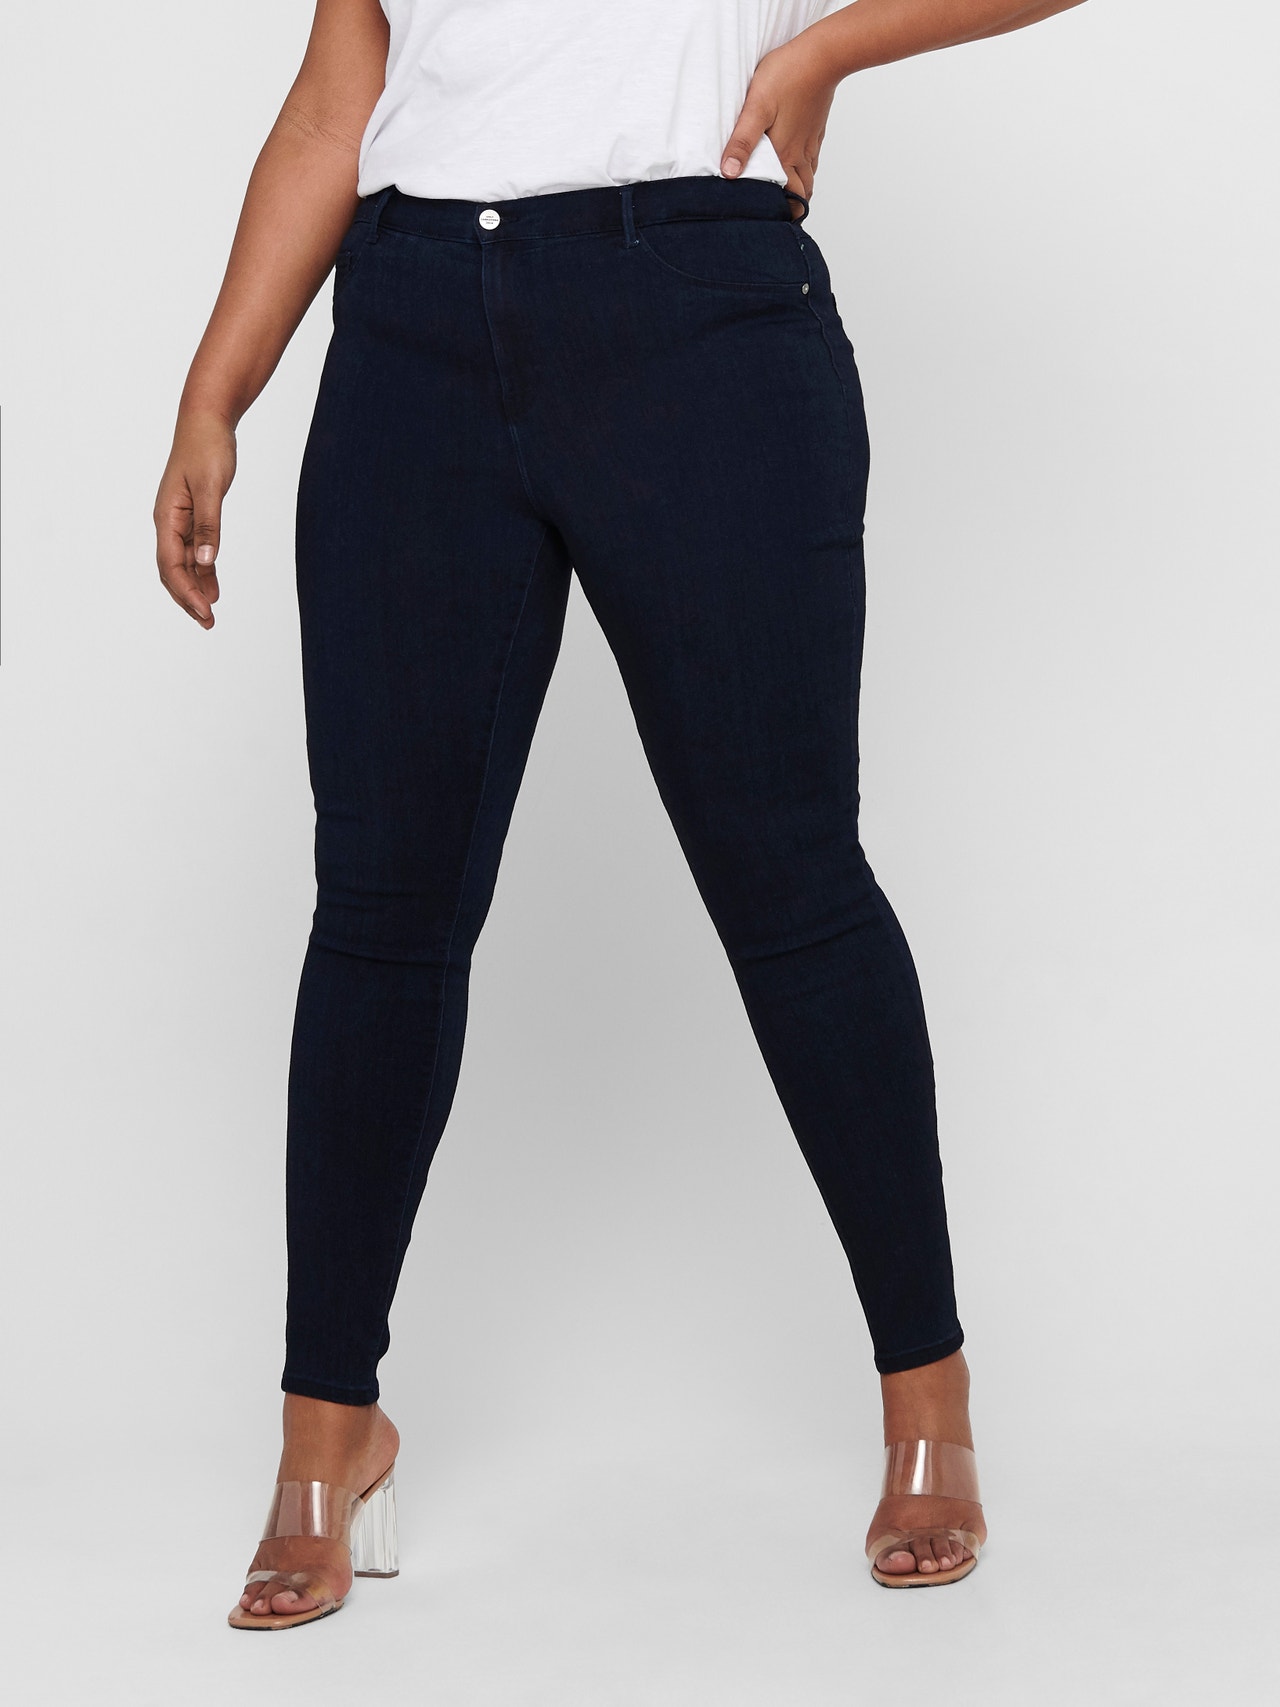 ONLY® with Fit waist 30% | Skinny High discount! Jeans